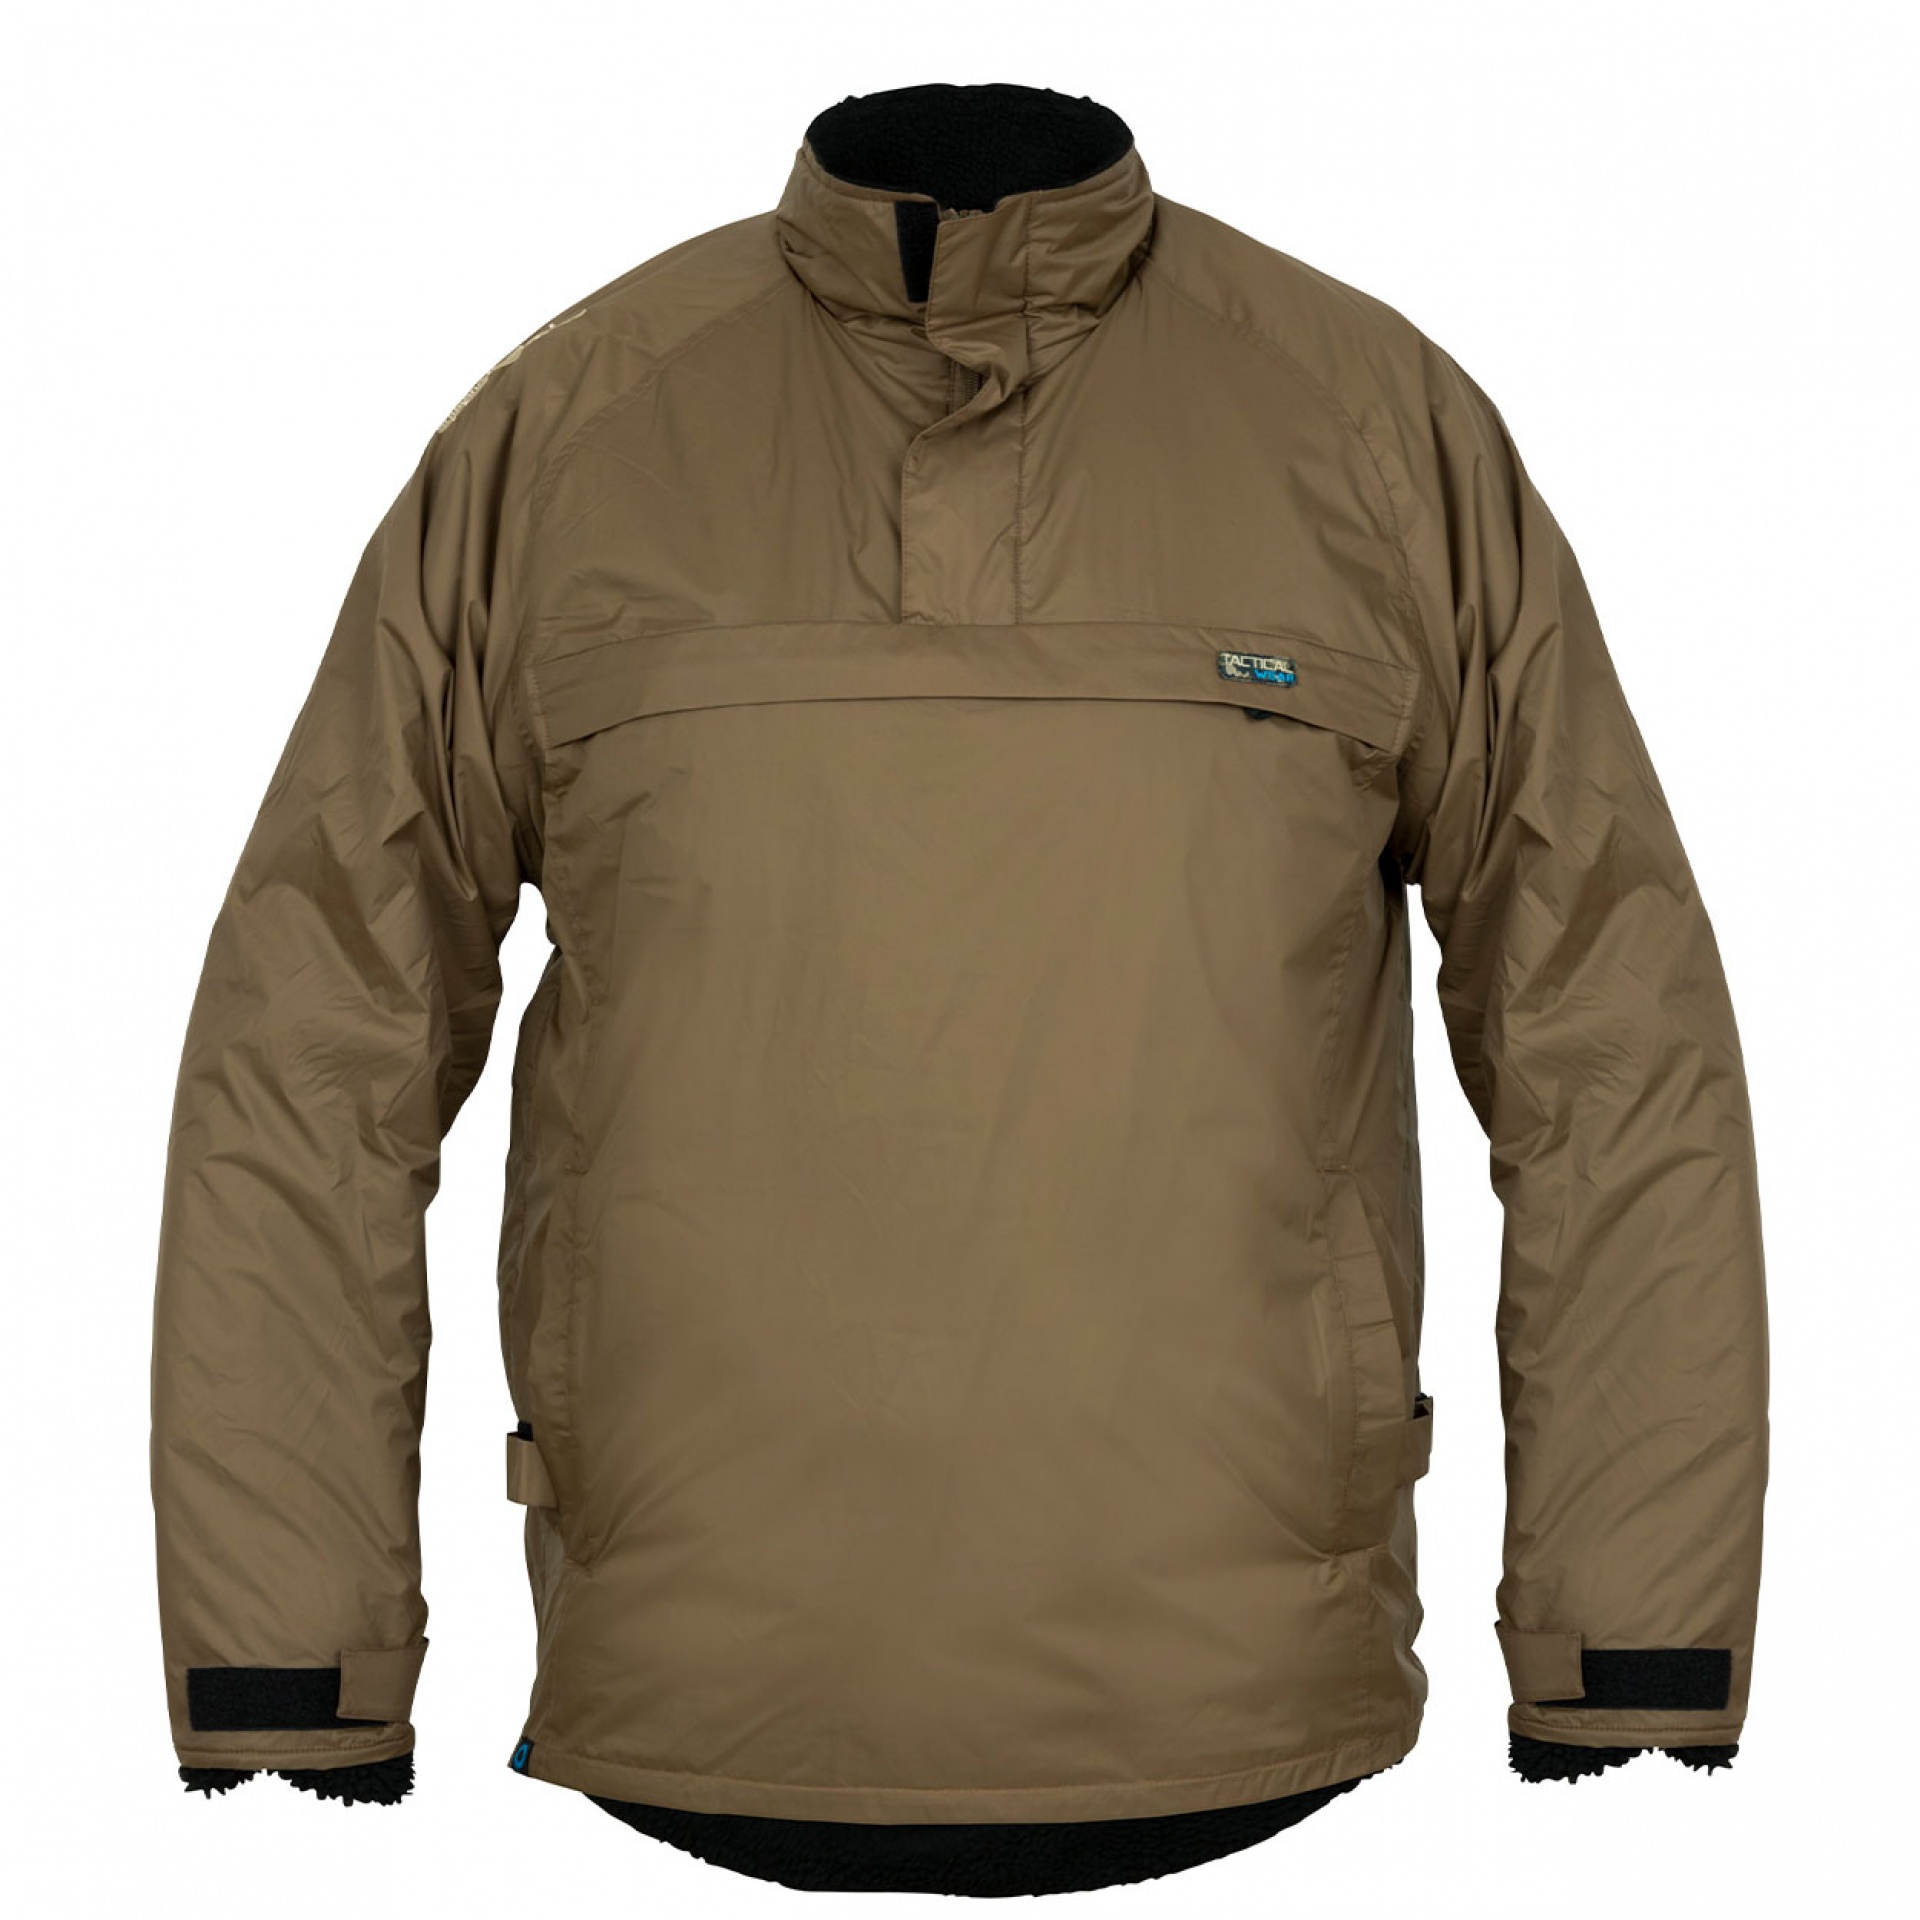 Shimano Tribal Tactical Wear Pullover